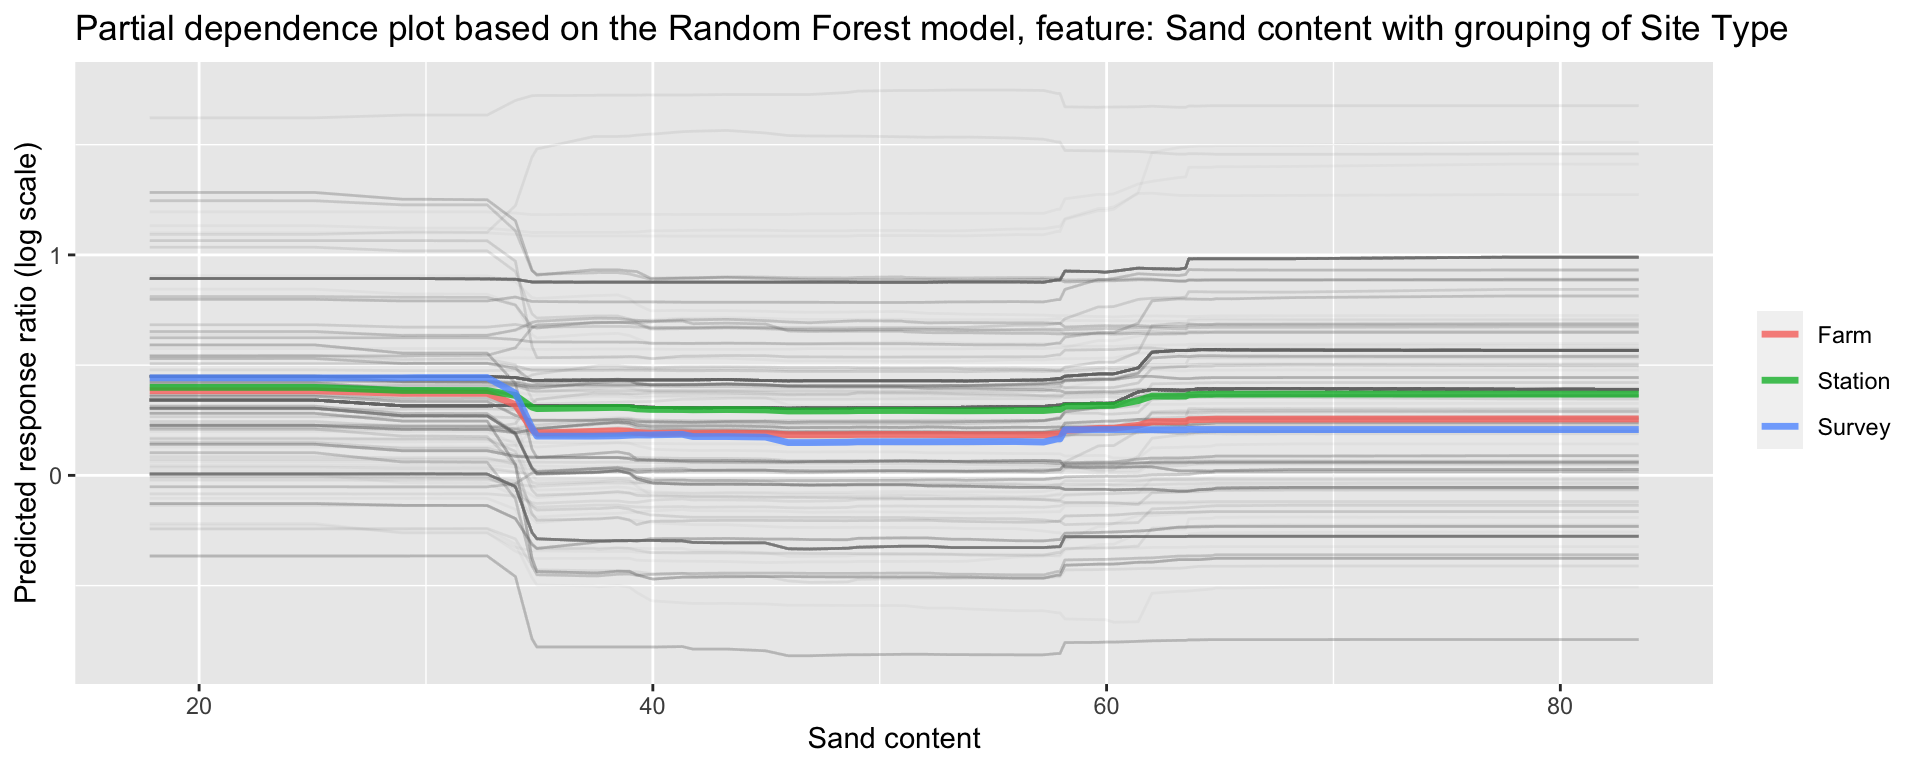 Partial dependence plot for Grouping of Site Type on Sand content